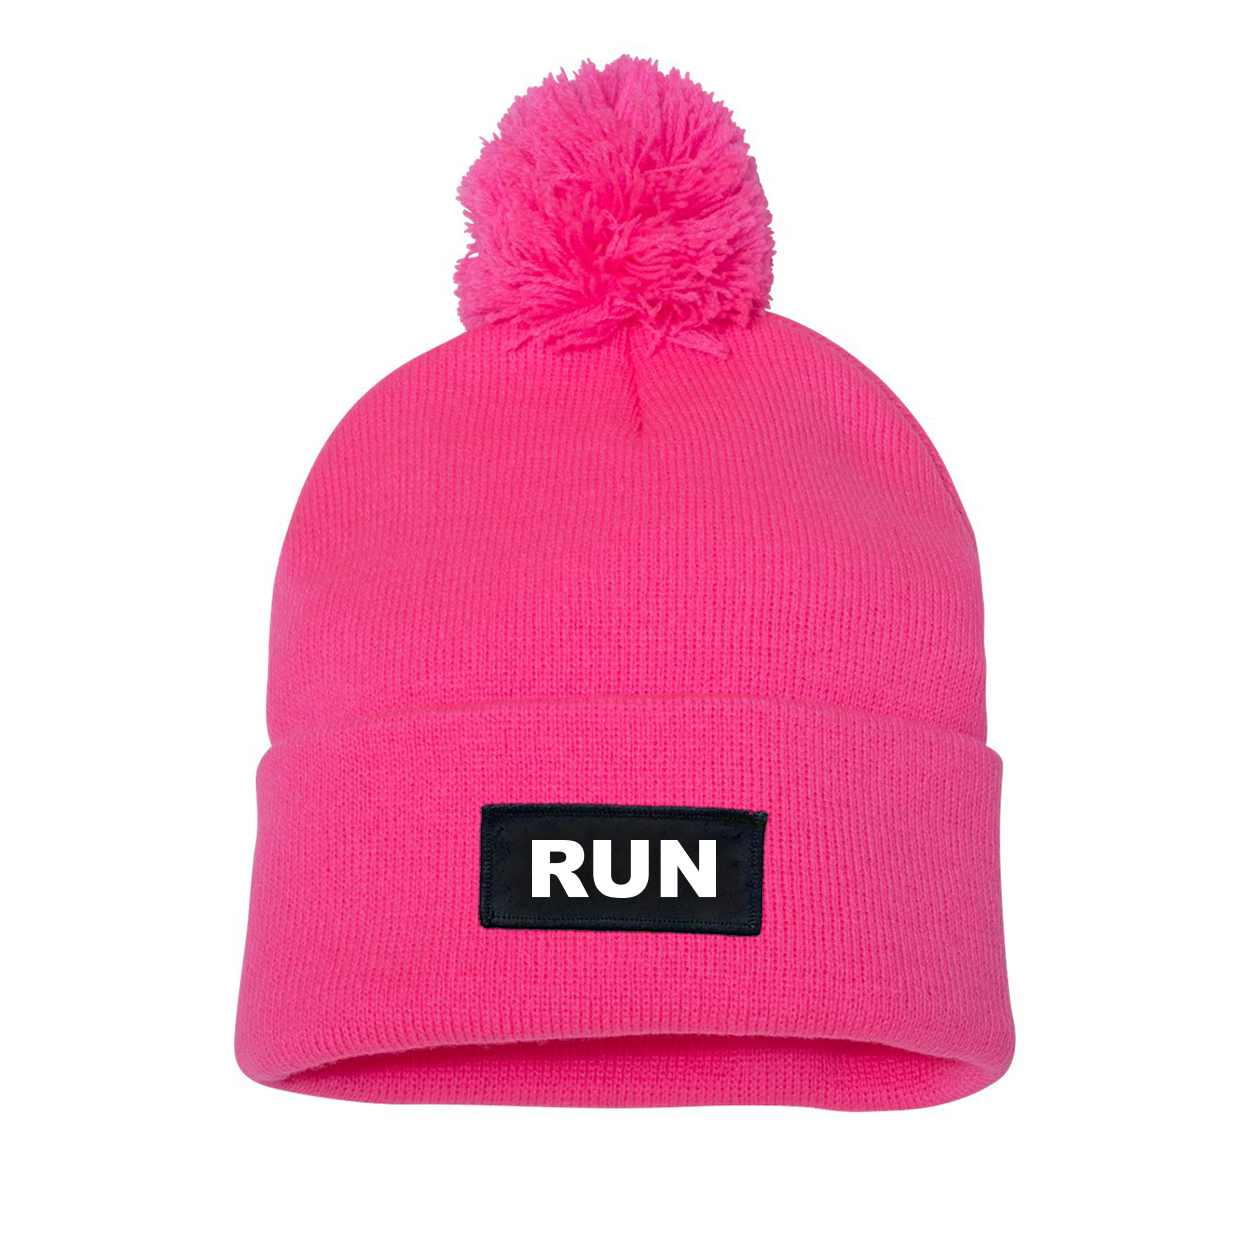 Run Brand Logo Night Out Woven Patch Roll Up Pom Knit Beanie Pink